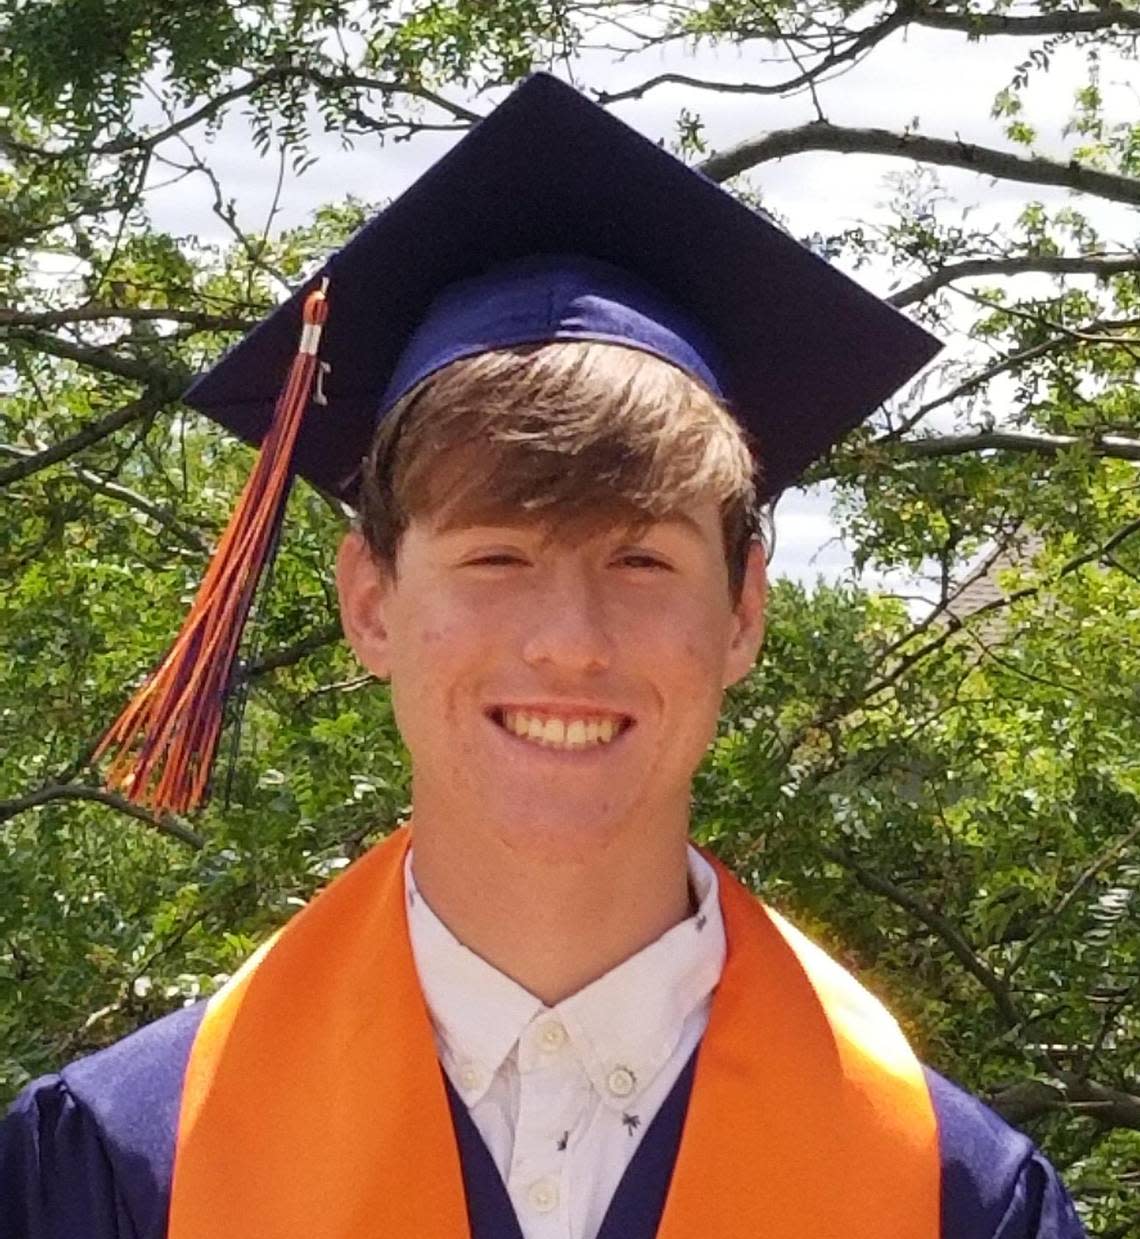 Adrian Caggianelli was a left-handed pitcher on his high school team at Olathe East High School. He died of fentanyl poisoning on July 28, 2020, after taking what he thought was a Xanax pill.